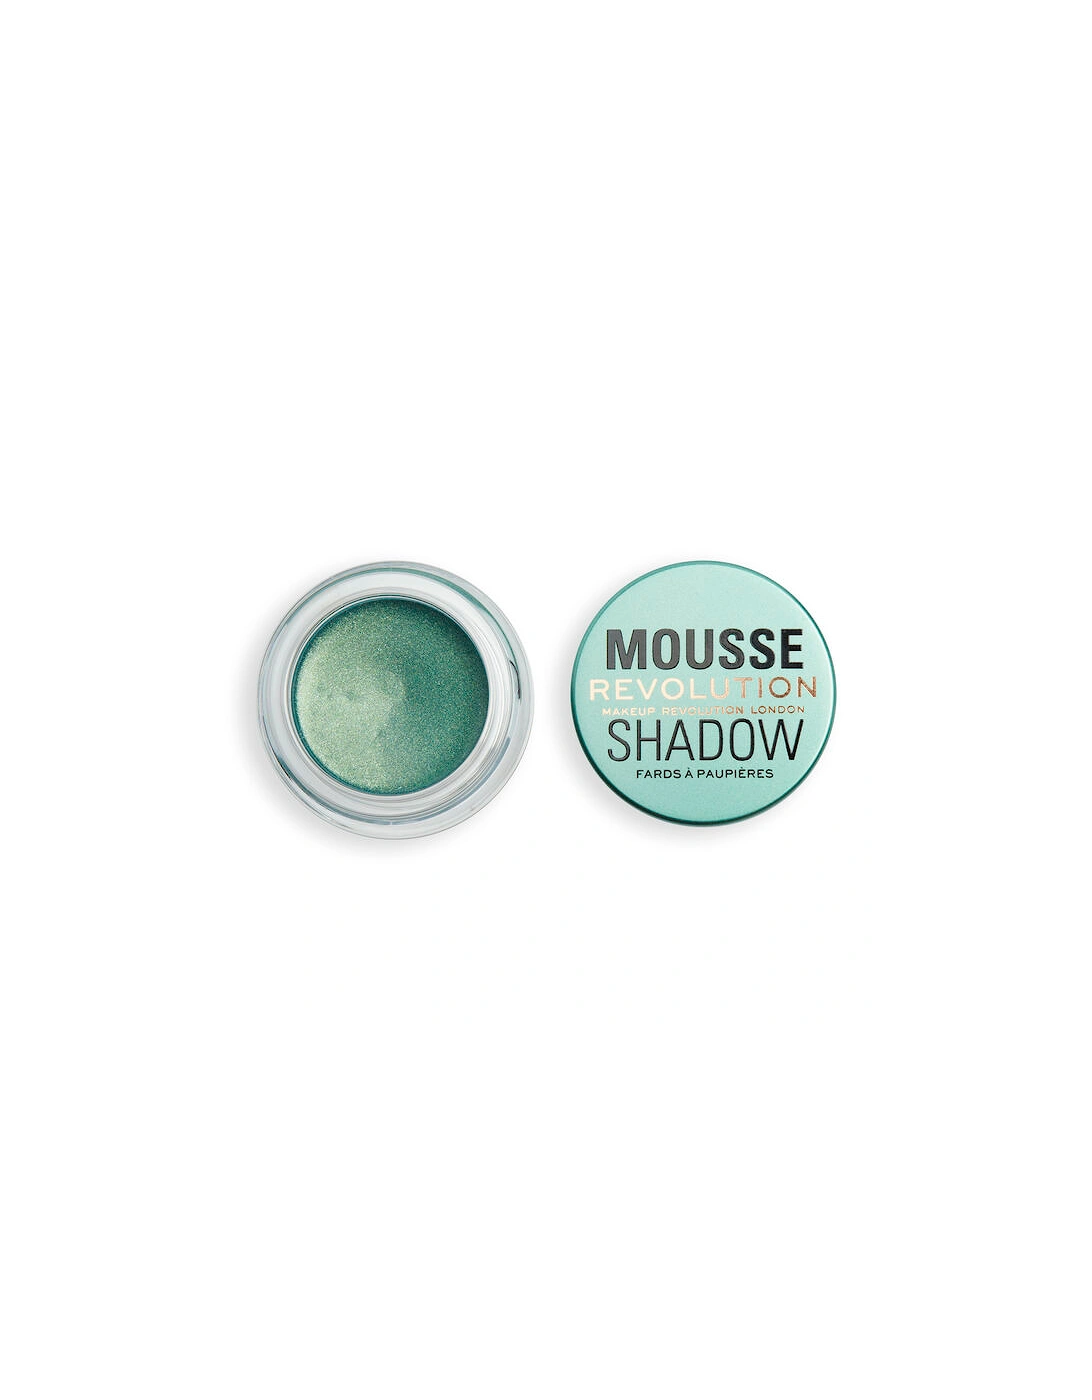 Makeup Mousse Shadow Emerald Green, 2 of 1